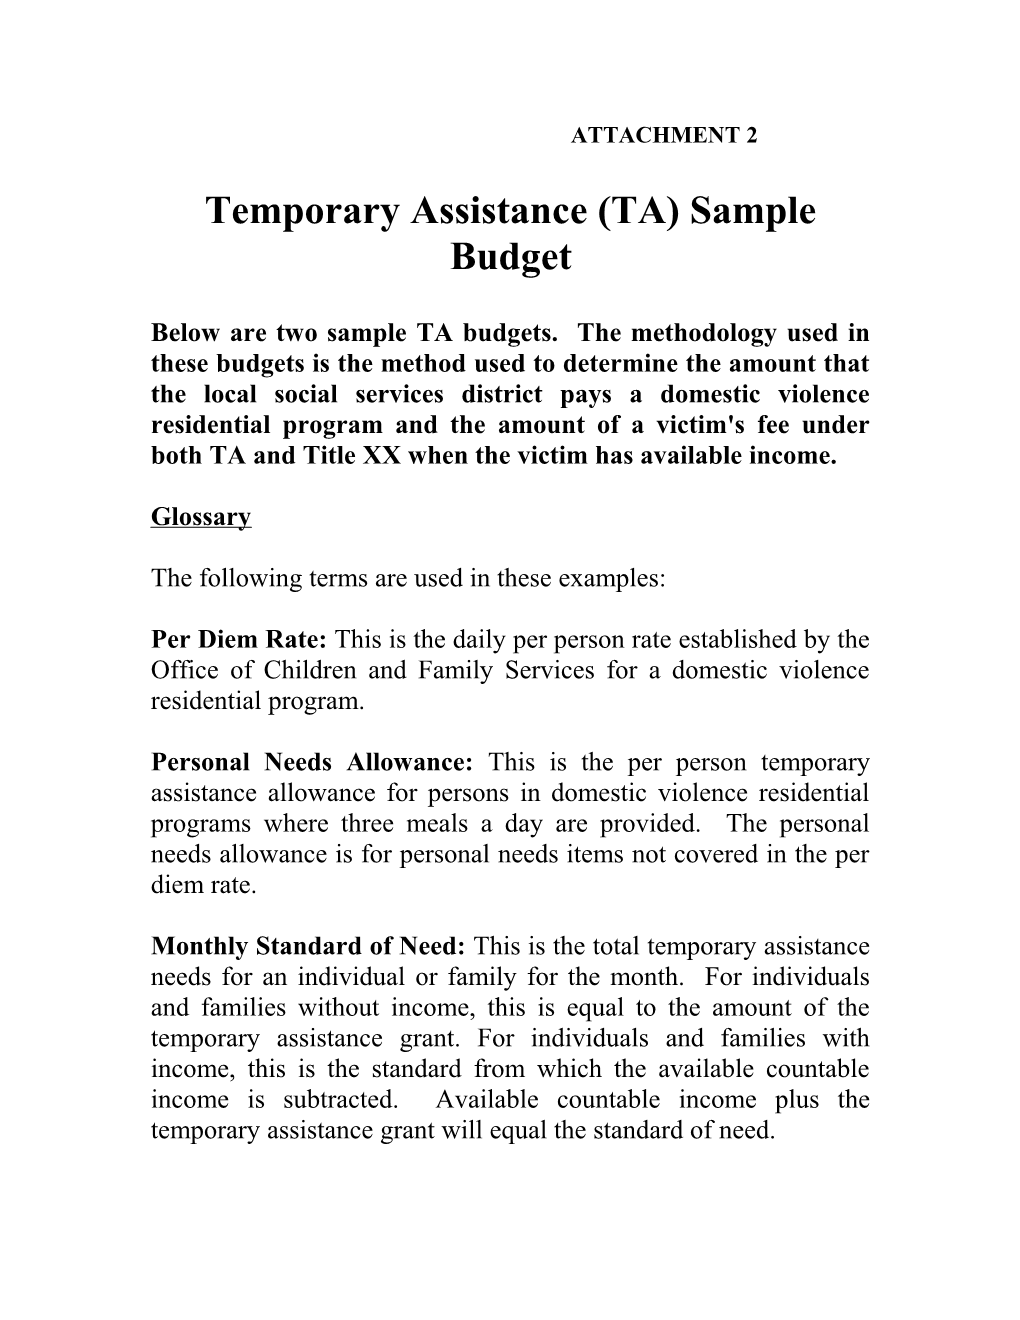 Temporary Assistance (TA) Sample Budget